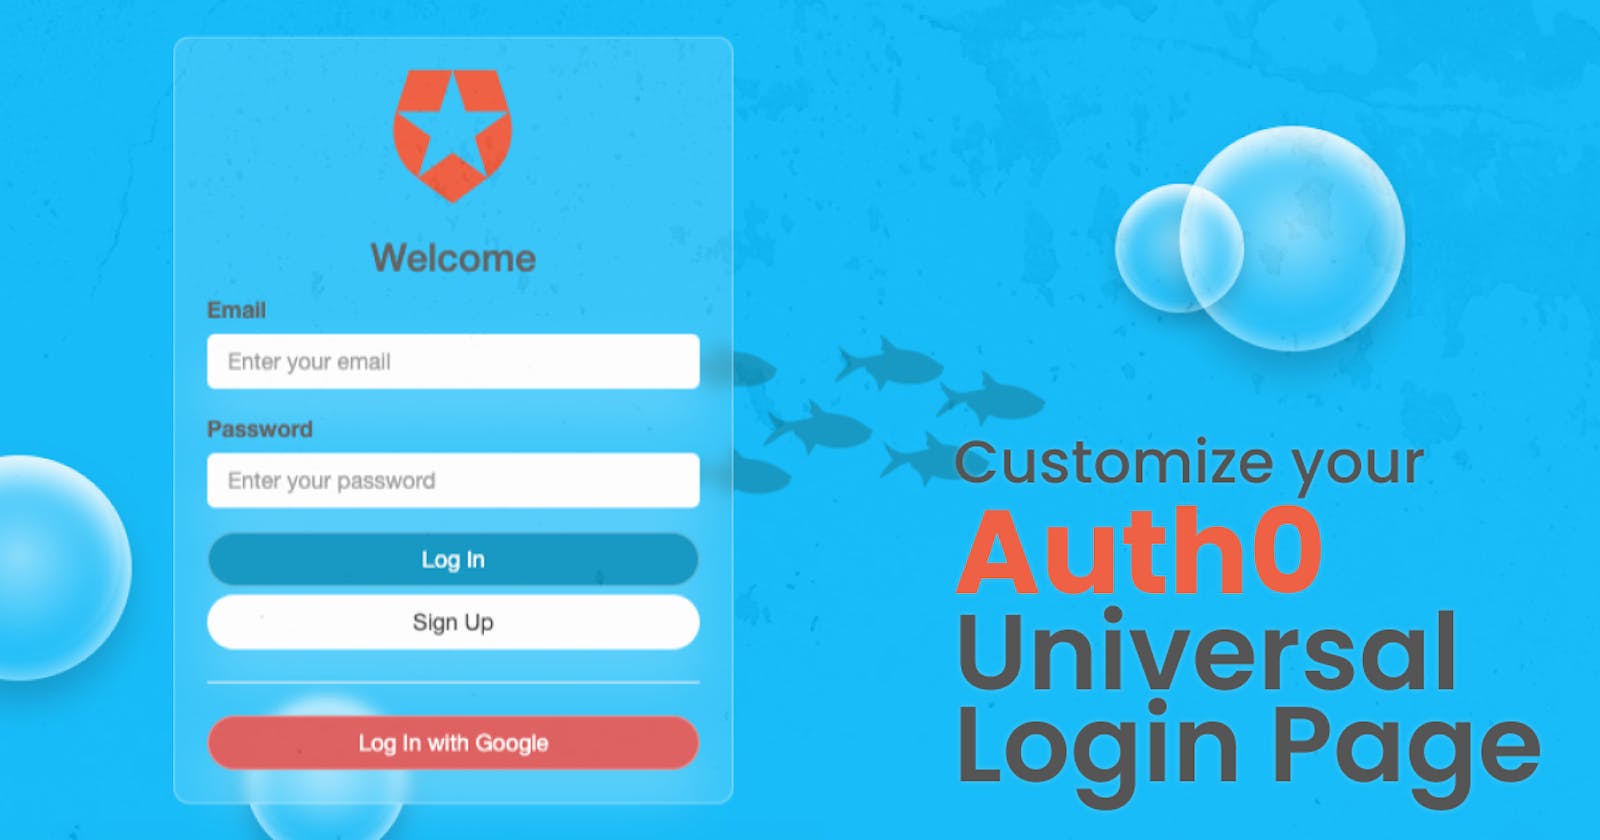 Customize your Auth0 Universal Login Page with Fun Animations